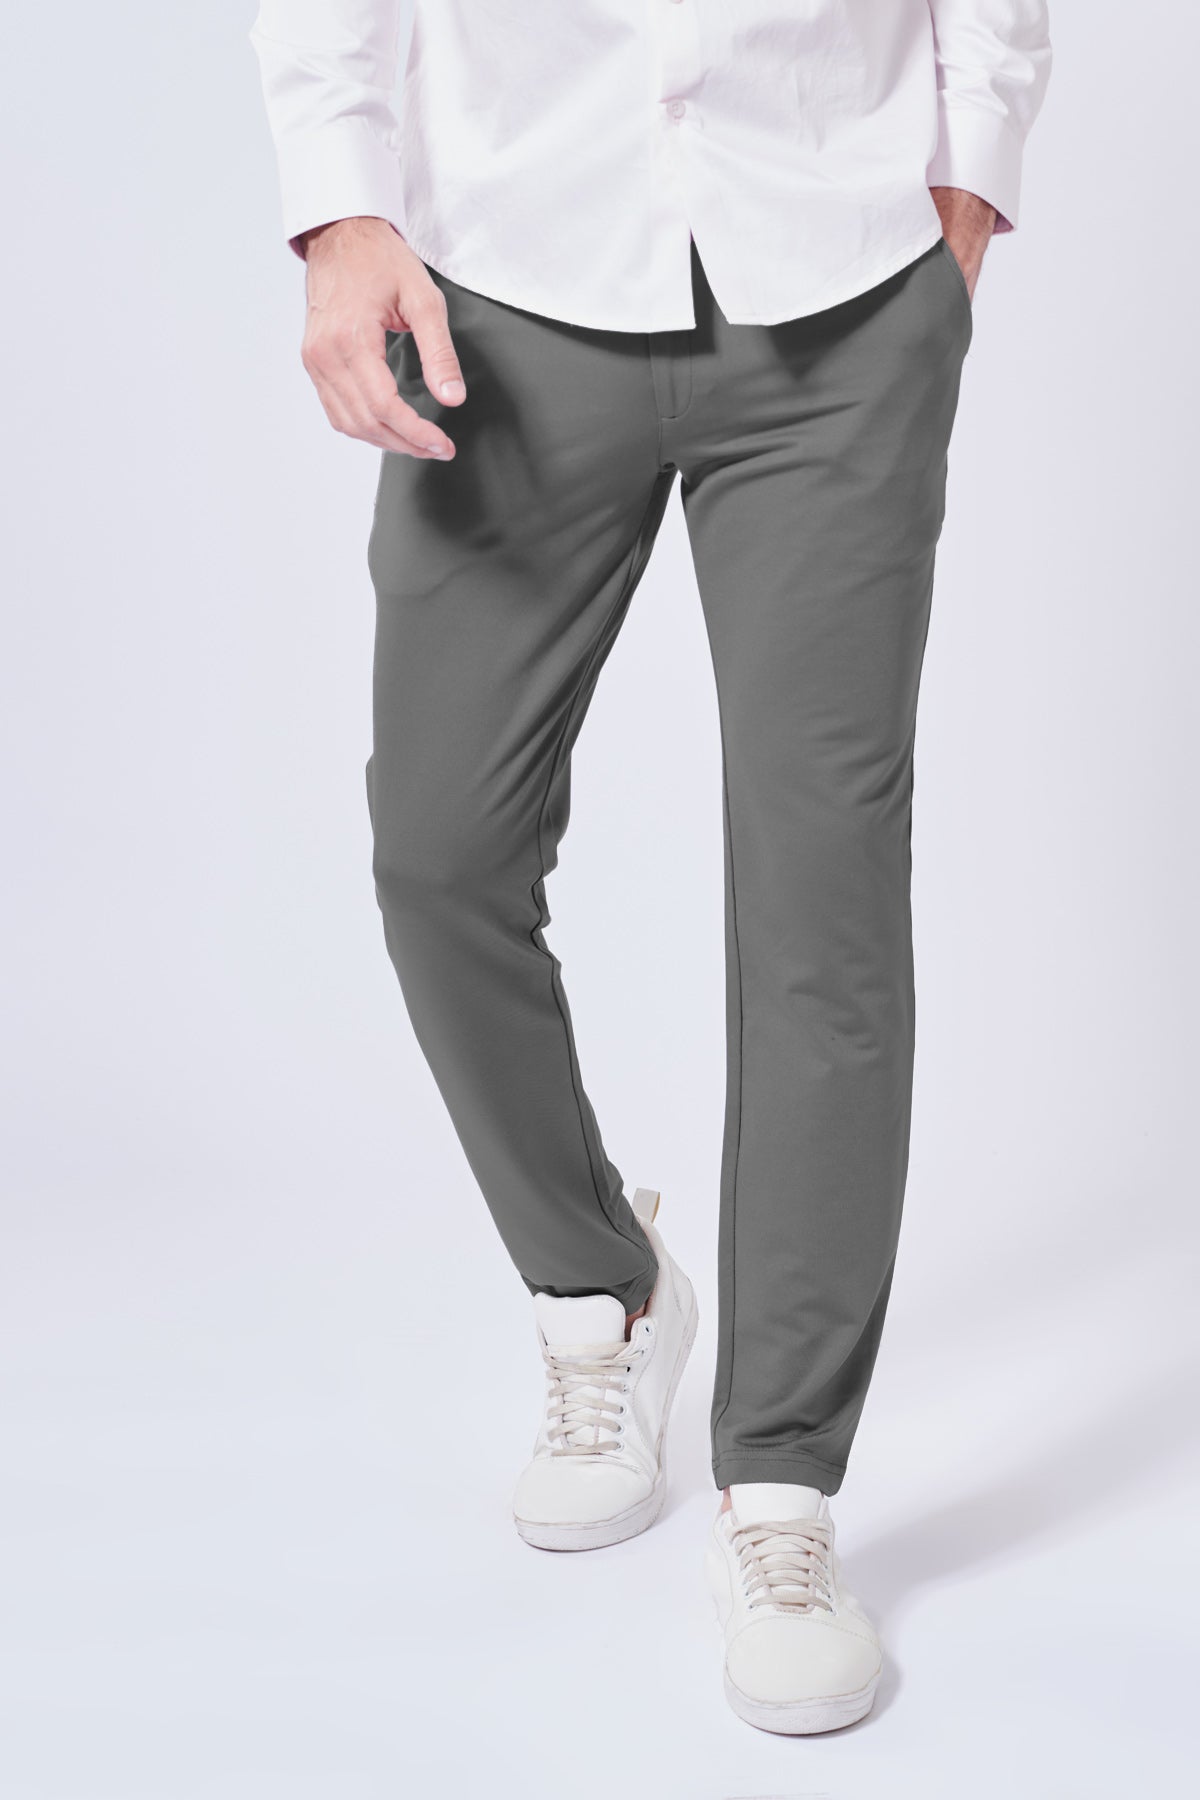 The Grey Pant Beyours Essentials Private Limited